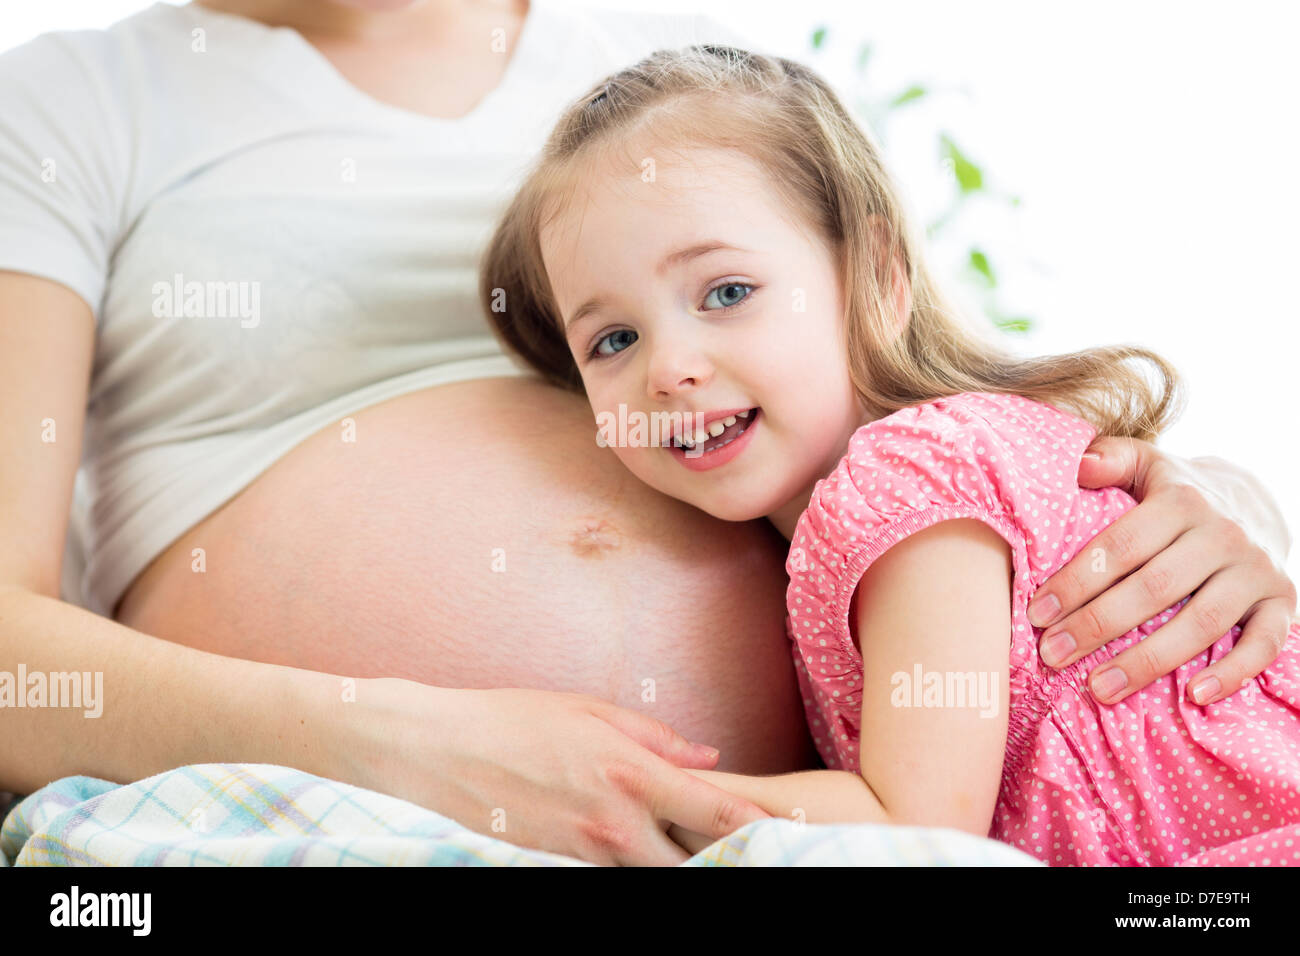 happy kid girl hugging pregnant mother's belly Stock Photo